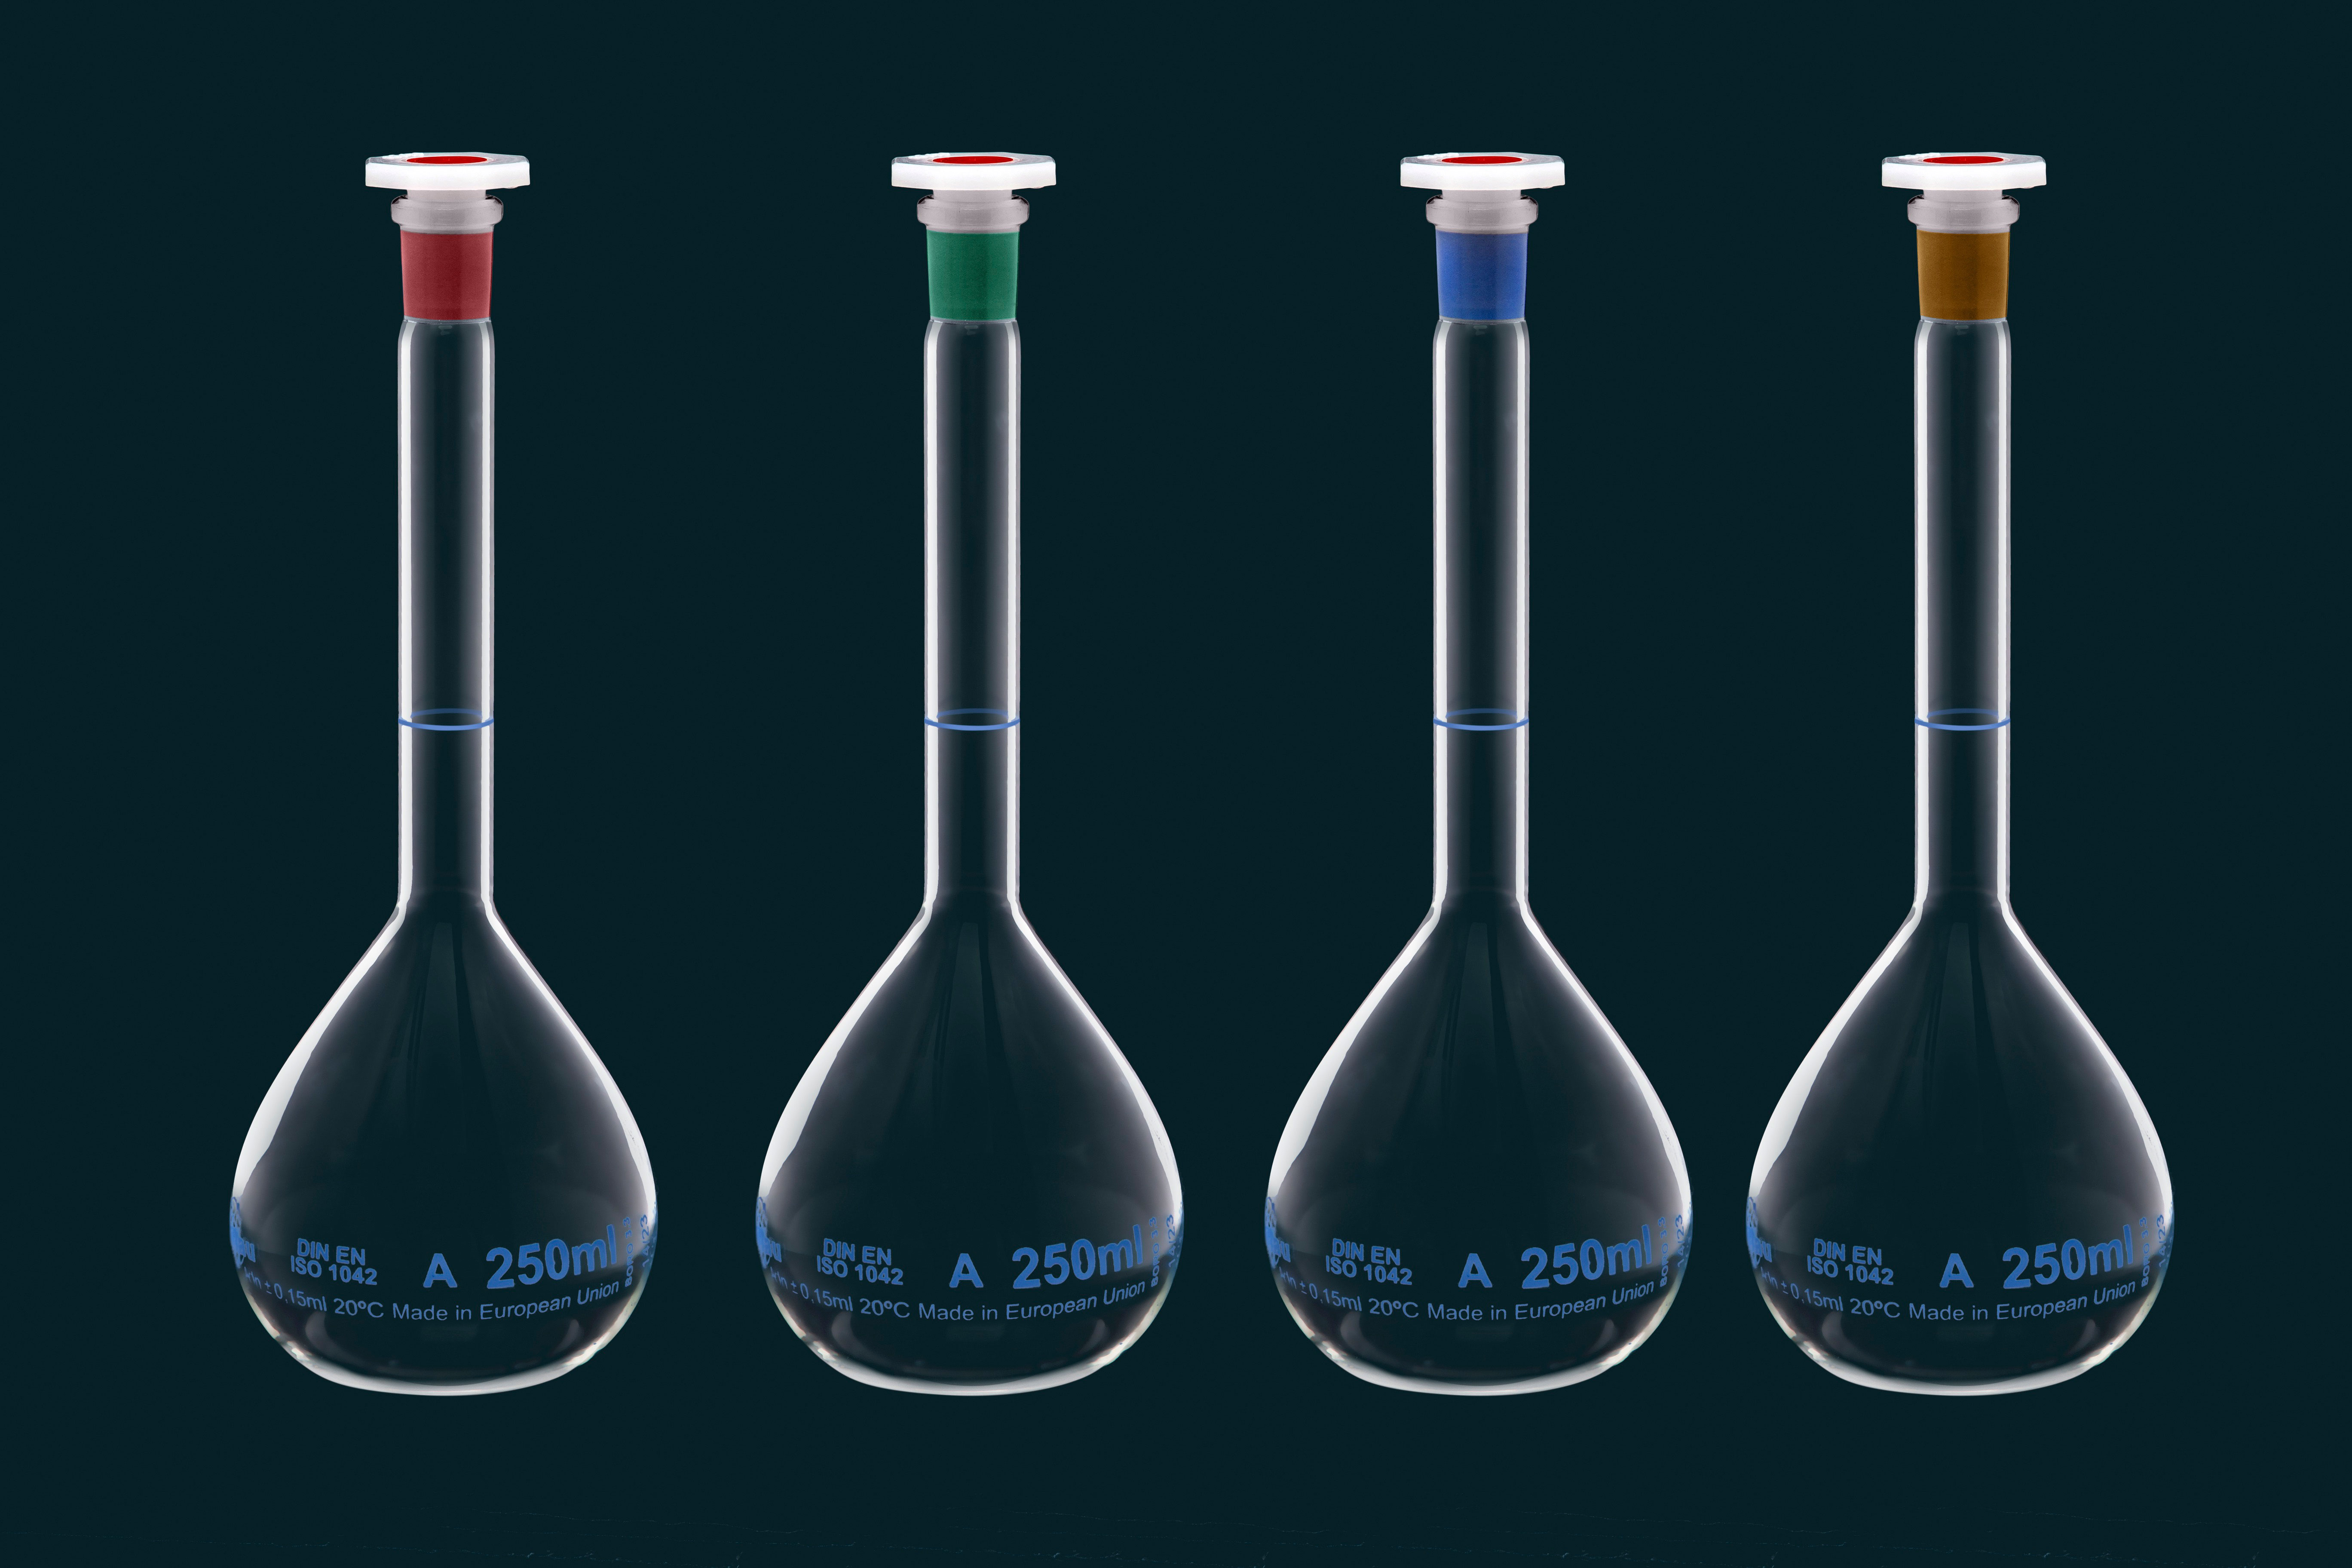 Volumetric flask with green neck, Class A, 100ml, with PE stopper, lot number and certificate of conformity